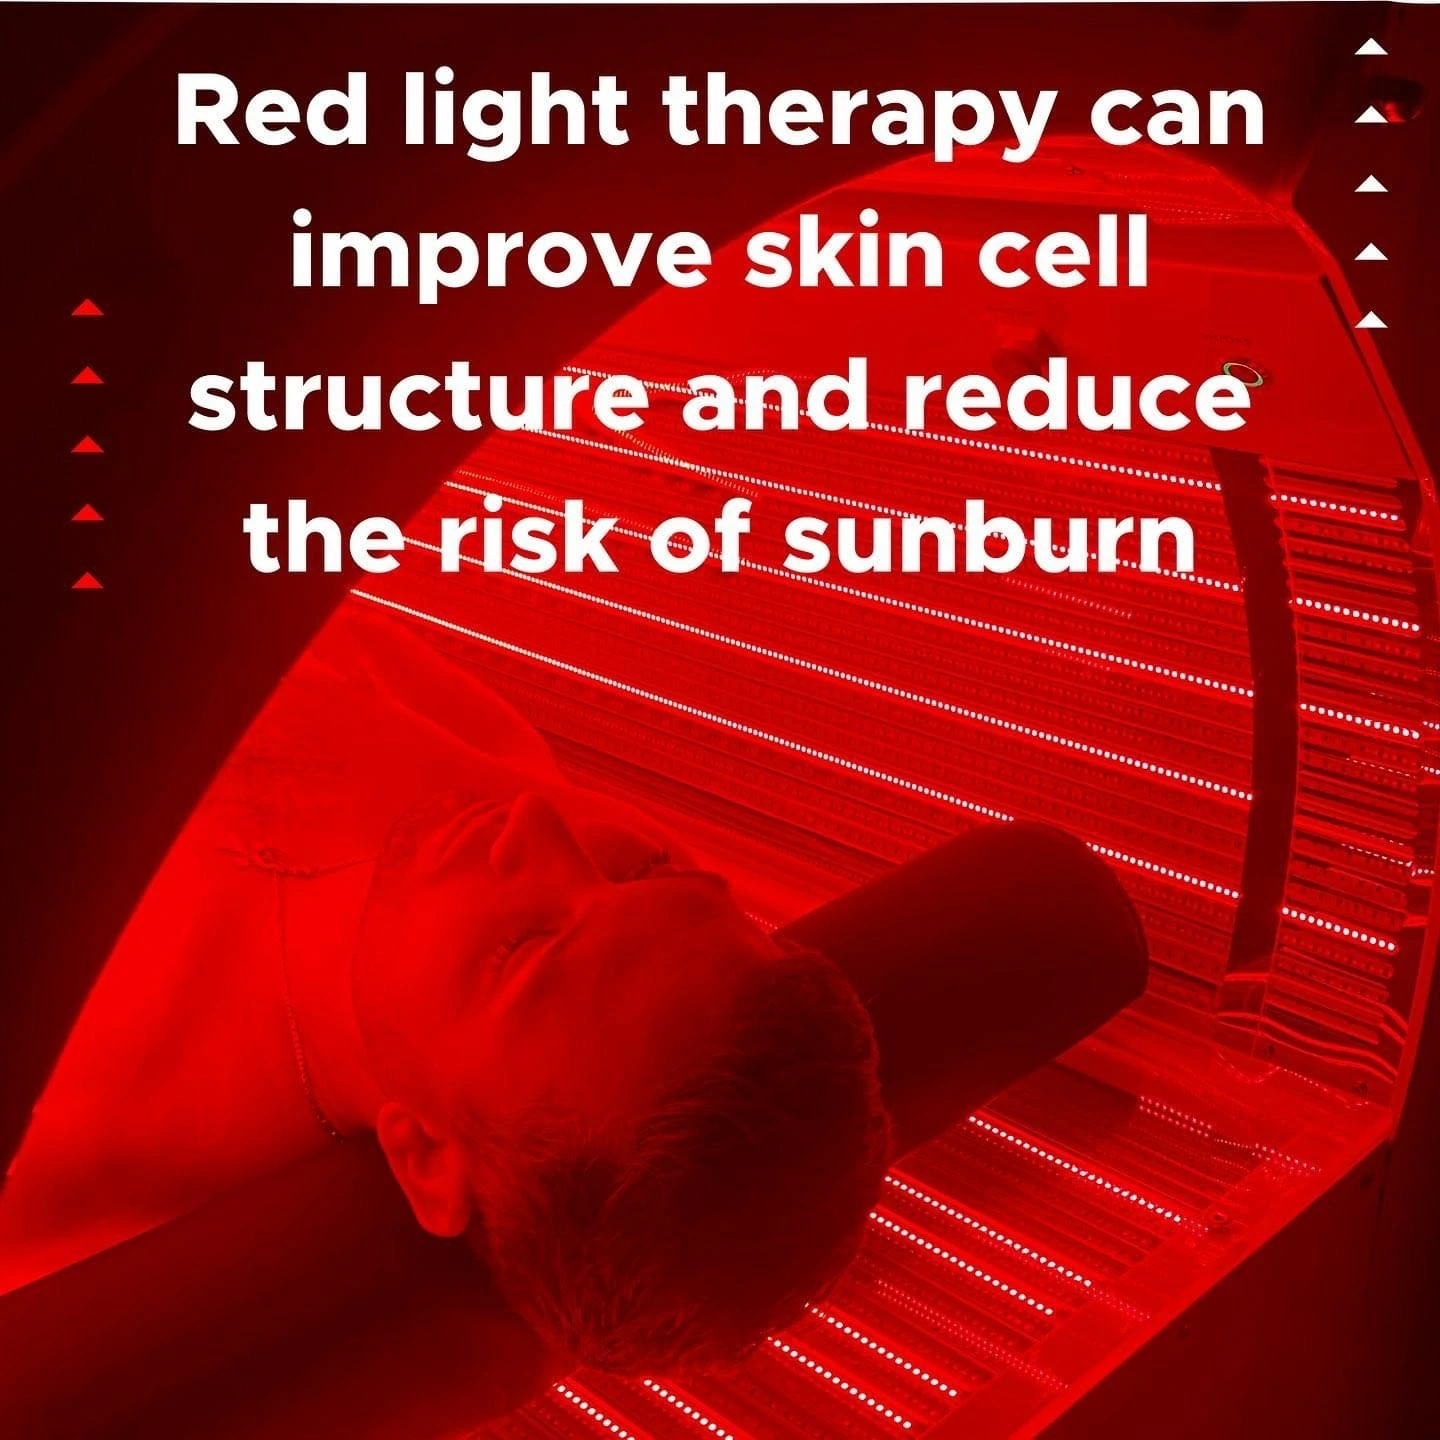 Experience the healing power of Red Light Therapy at RevitalWave in Long Island, New York